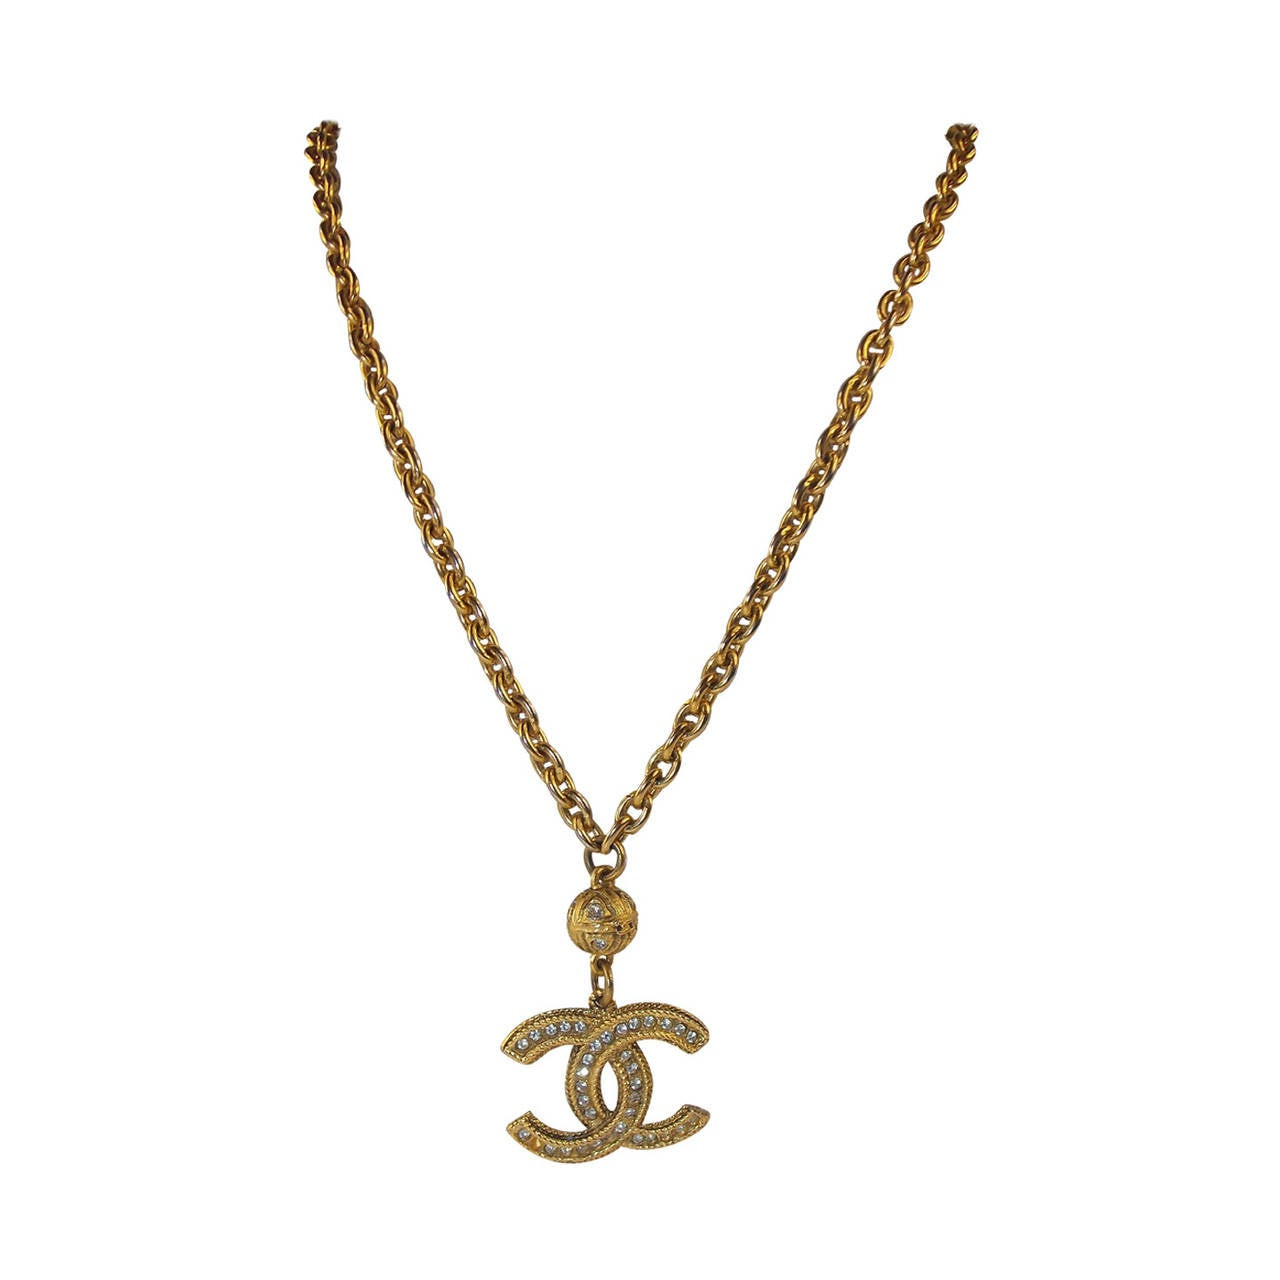 Chanel Pendant Necklace
 Chanel Necklace with Crystal Logo Pendant For Sale at 1stdibs